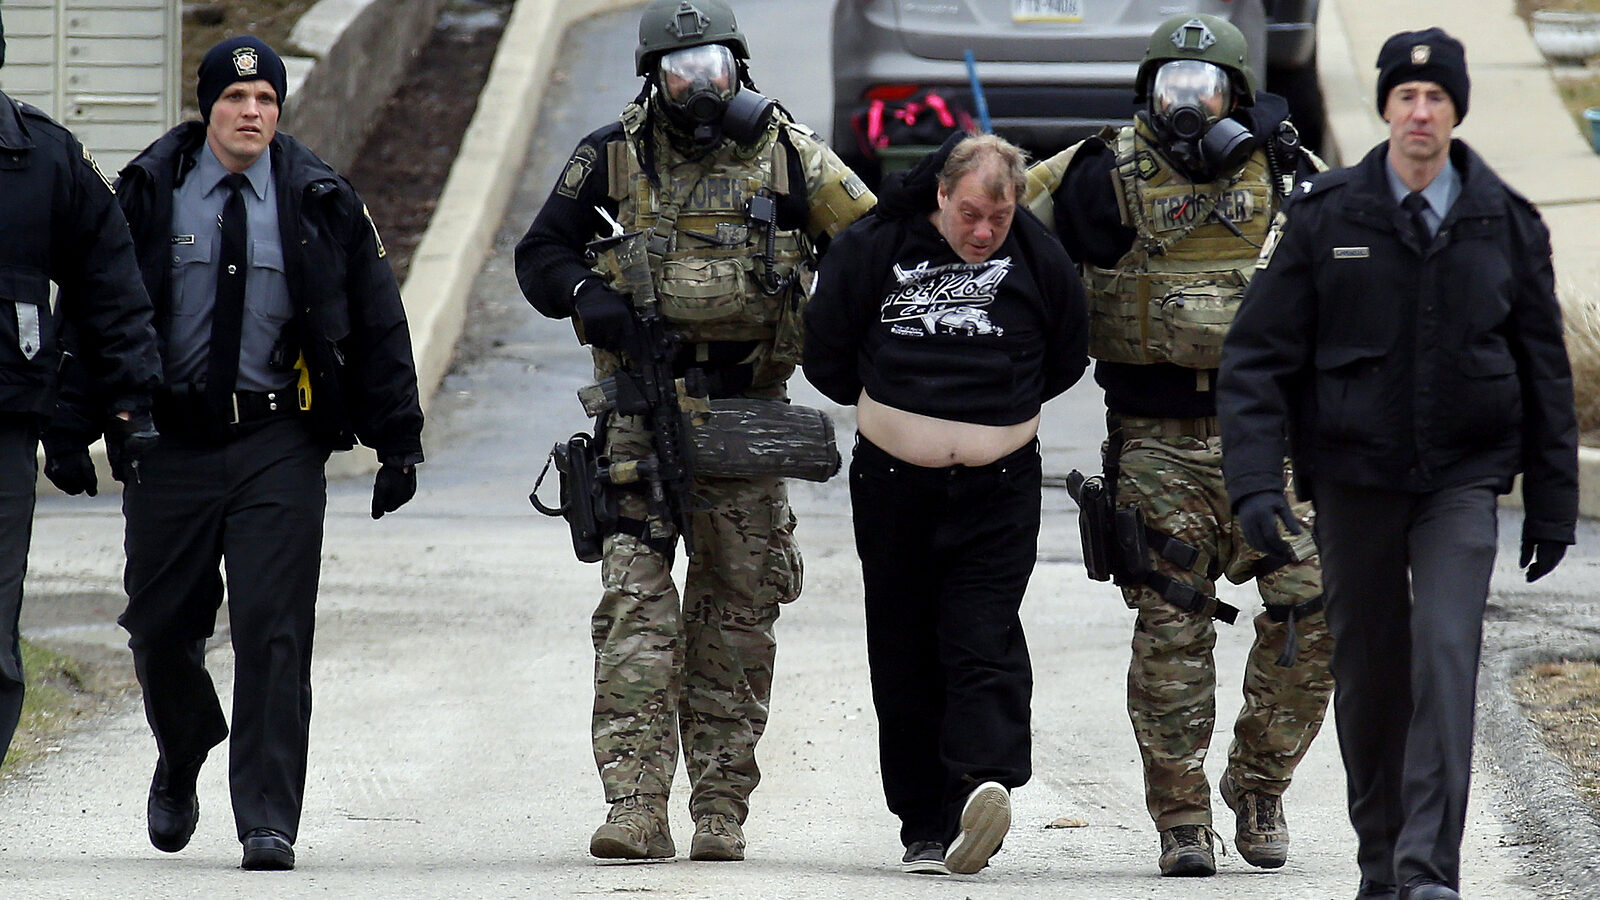 Police escort a suspected fugitive wanted in connection with a bomb threat after a tense eight hour standoff in Hempfield, Pa. The recent Planned Parenthood shooting in Co. resulted in police taking the conservative white male suspect alive causing many to question if race plays a role in who survives police staondoffs. (AP Photo/Keith Srakocic)